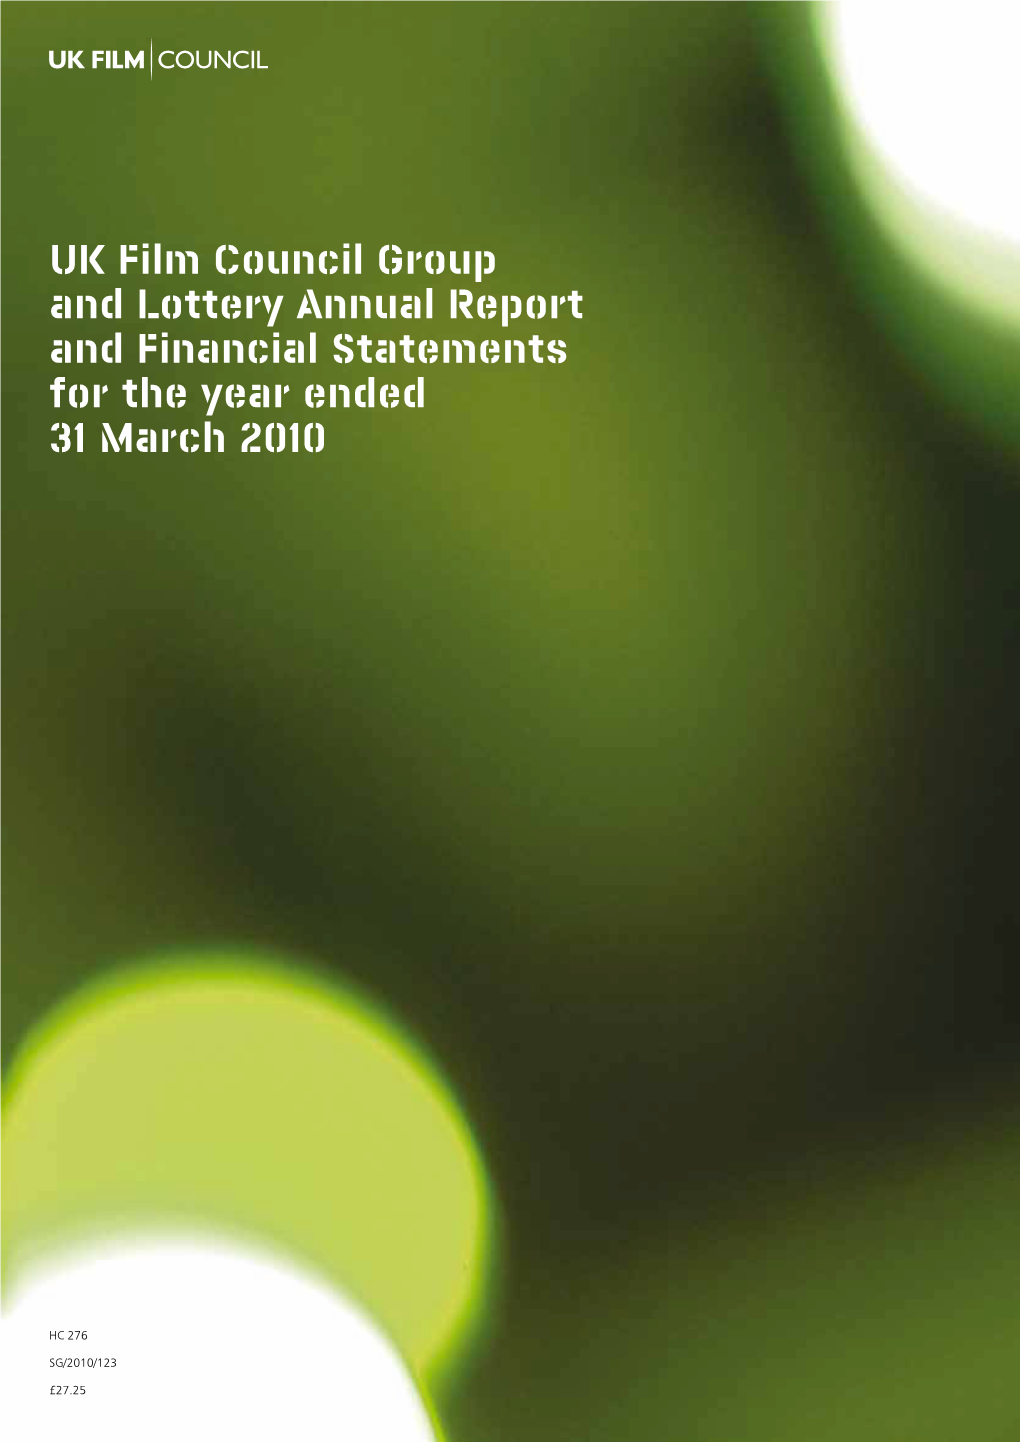 UK Film Council Annual Report and Accounts 2009-2010